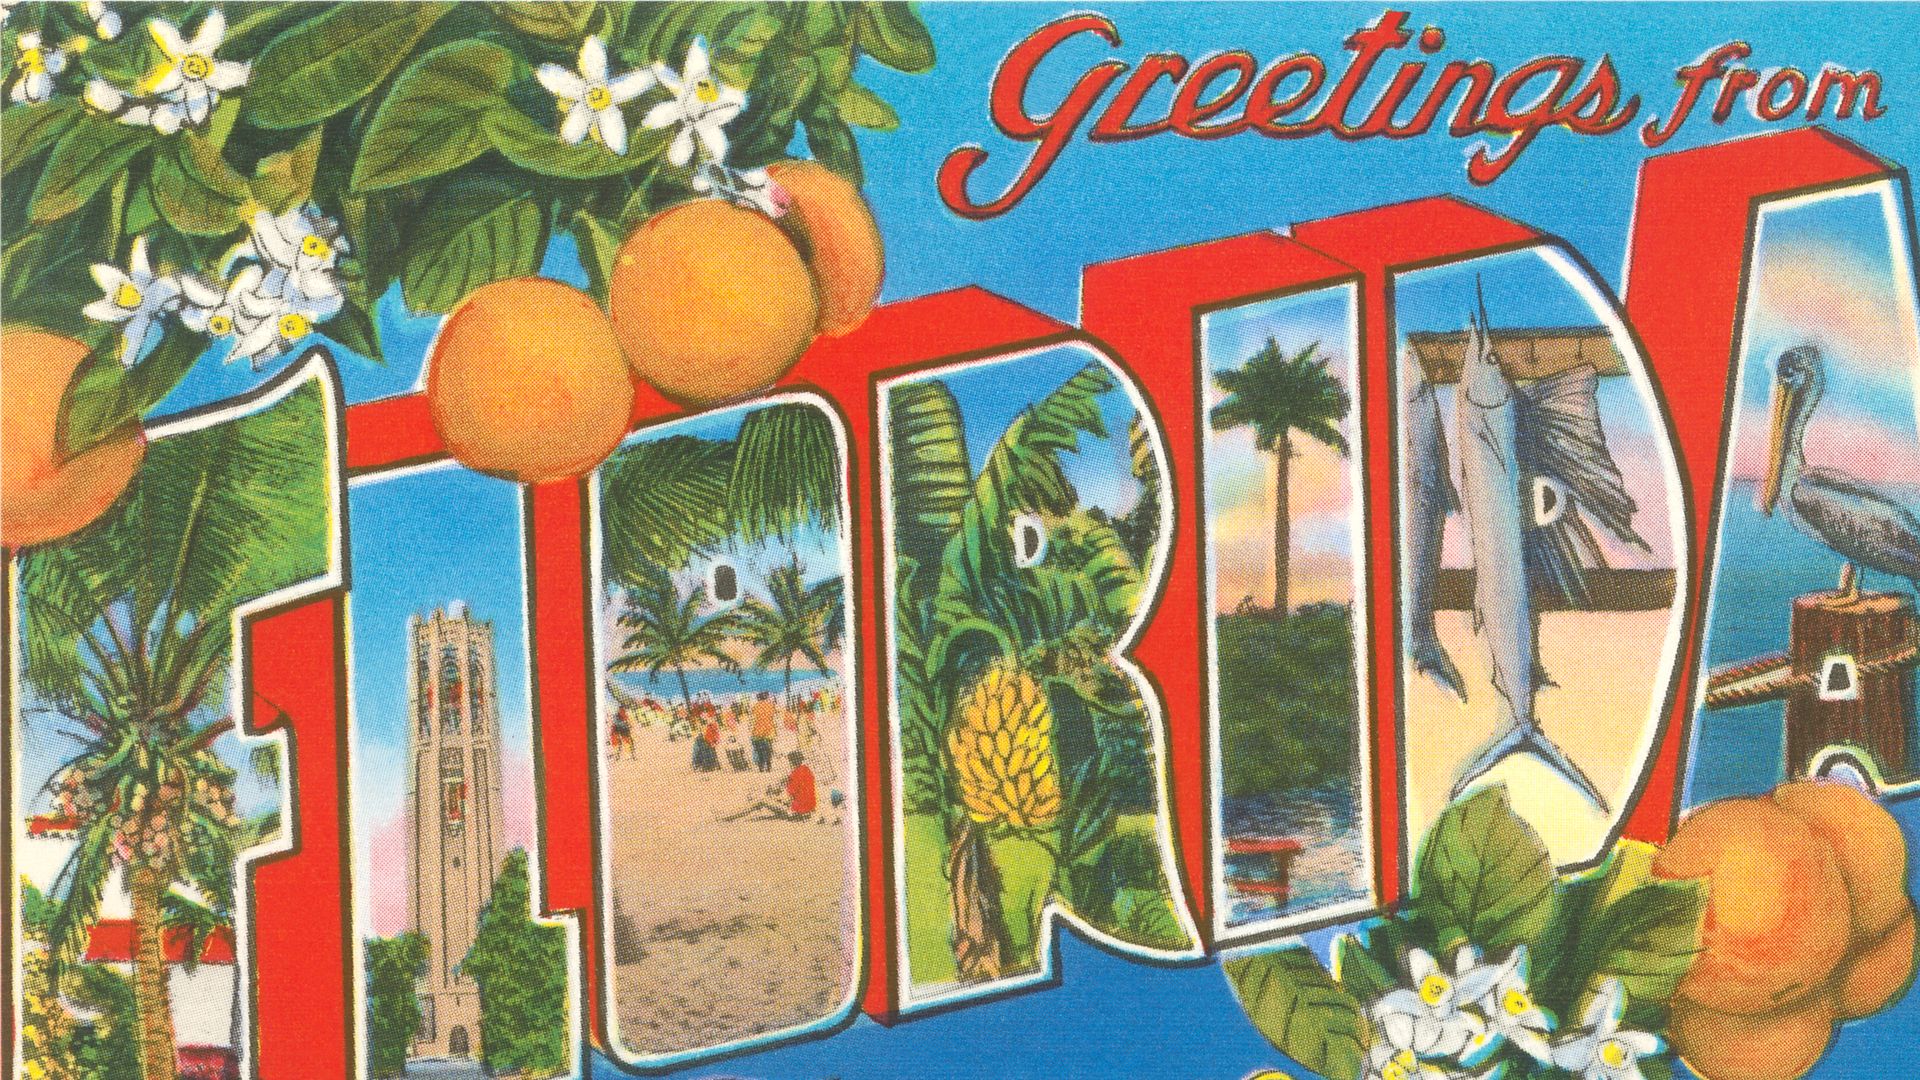 Old postcard reading "greetings from Florida tropical wonderland" with orange blossoms 